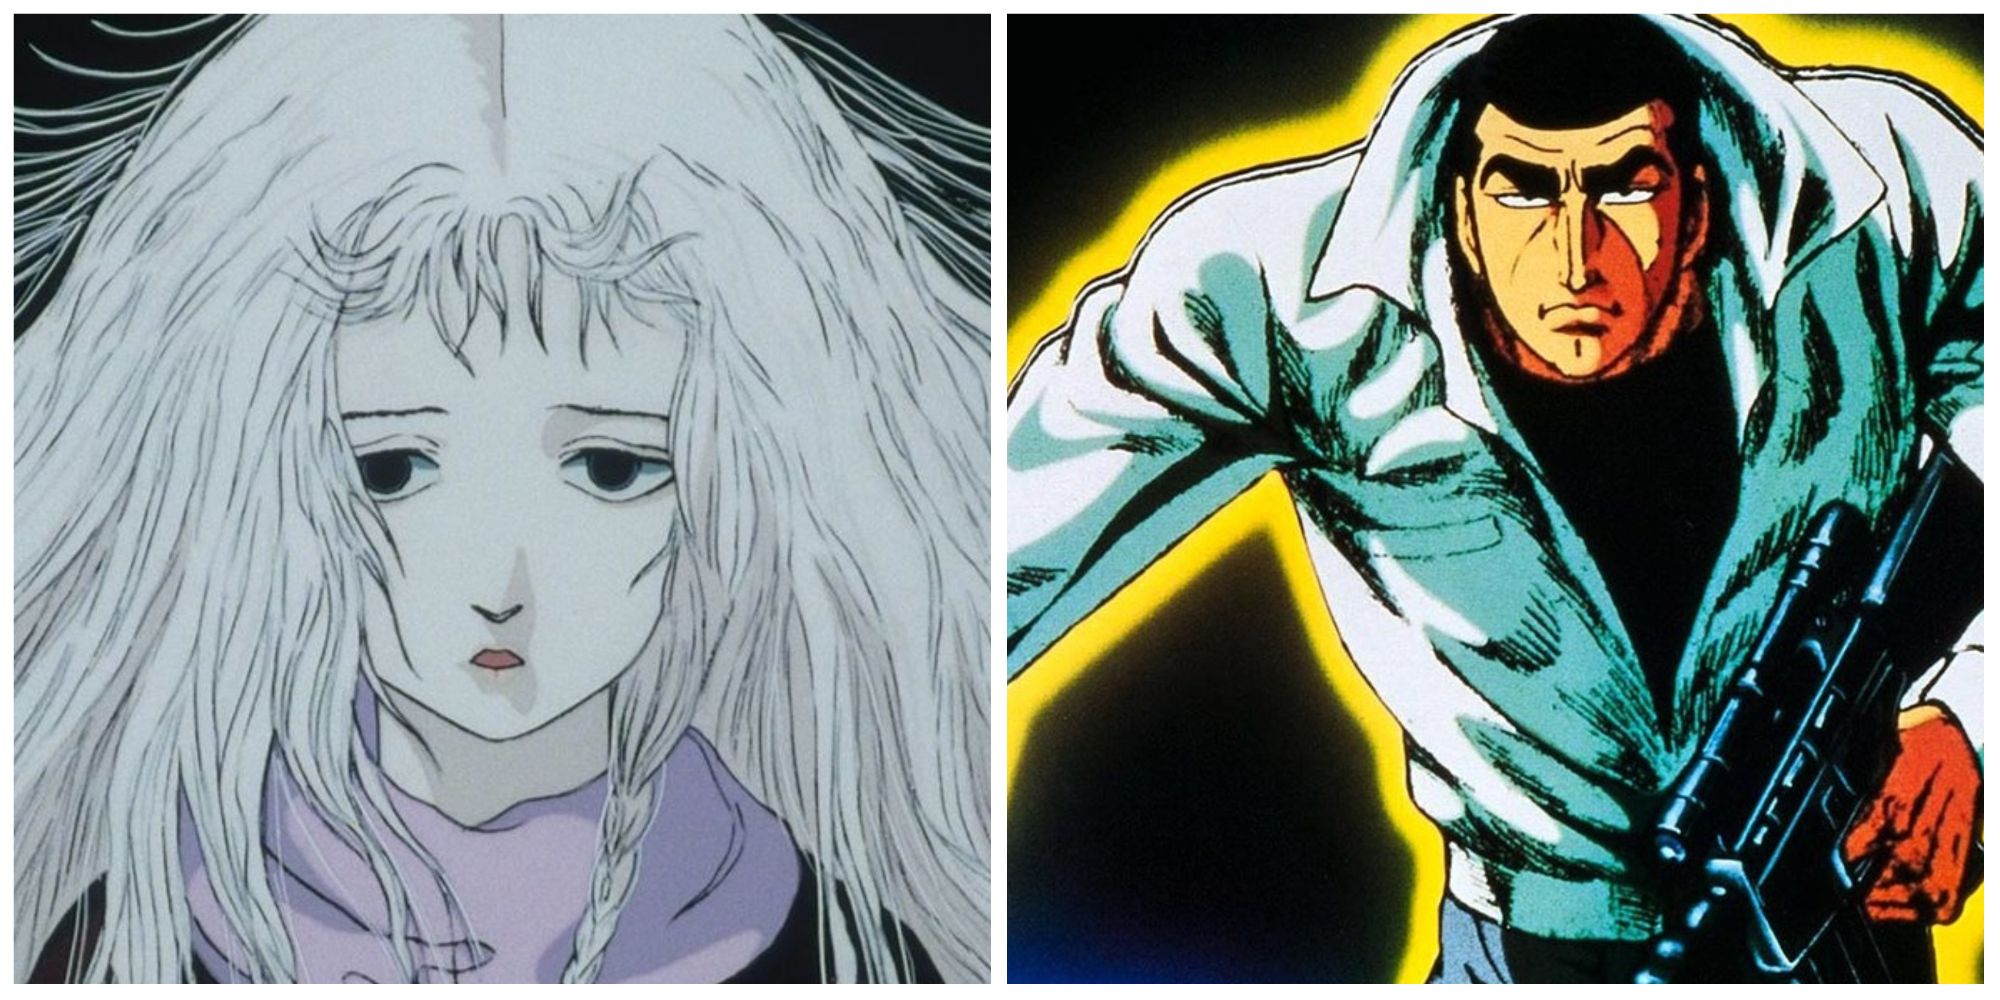 Protagonists of Angel's Egg and Golgo 13